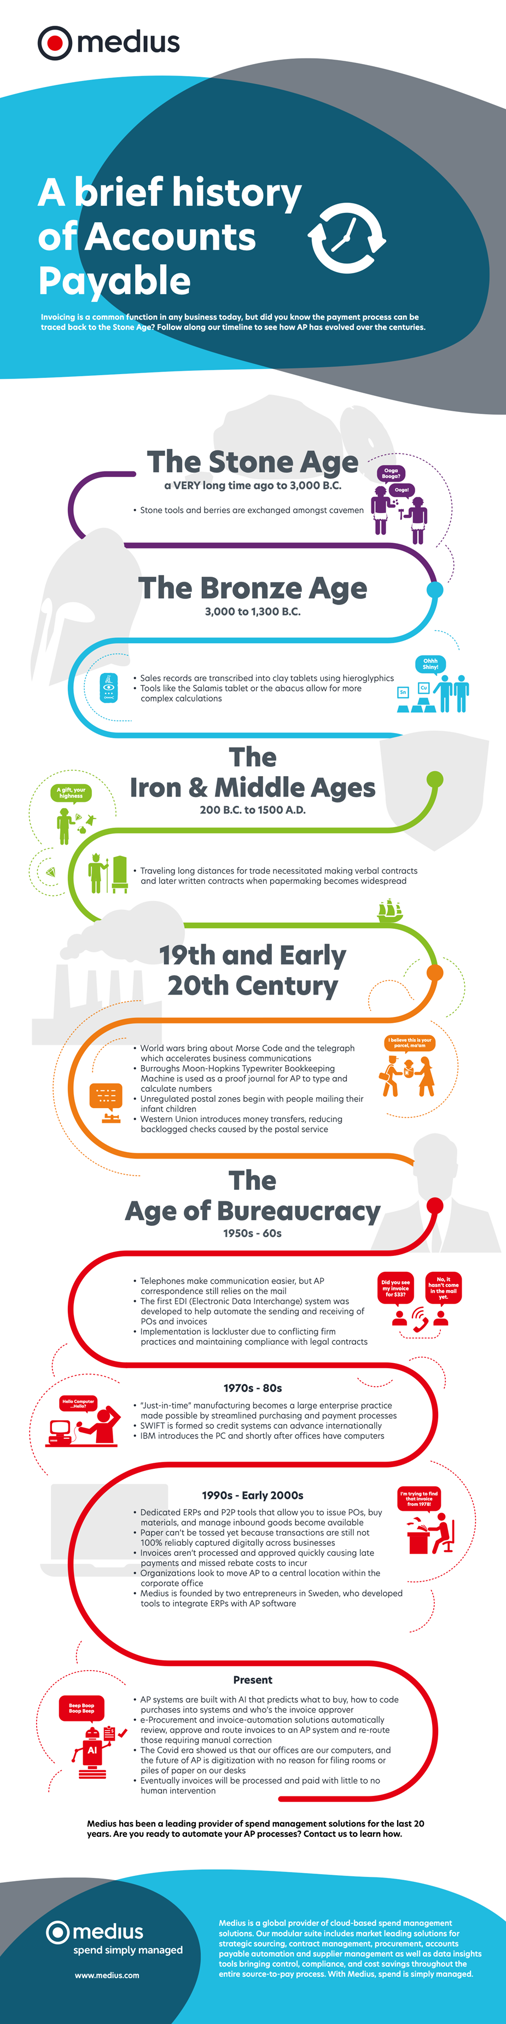 history of accounts payable infographic